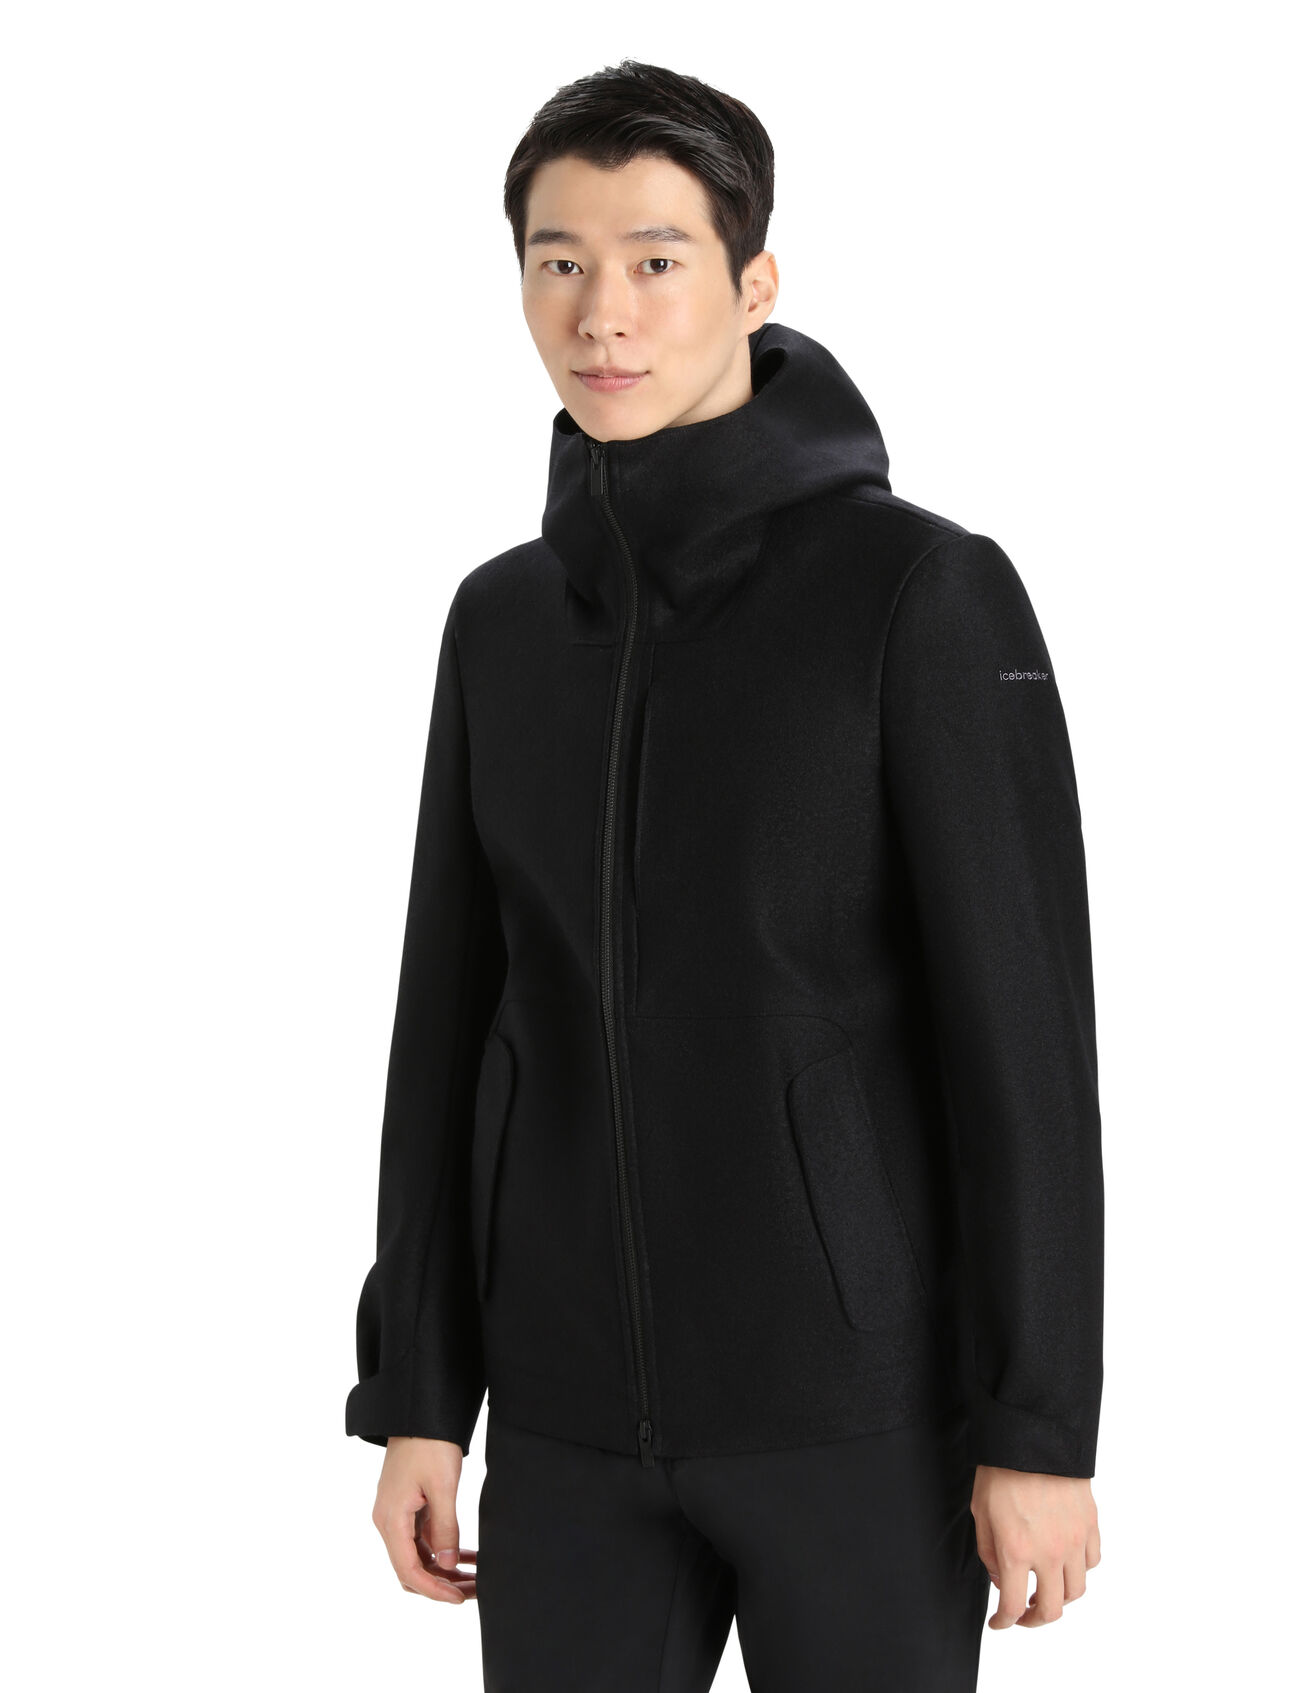 Mens Felted Merino Hooded Jacket A classic felted merino jacket ideal for everyday warmth and cold-weather commutes, the Felted Merino Hooded Jacket features 100% felted merino wool that regulates body temperature and naturally resists odors no matter the weather.